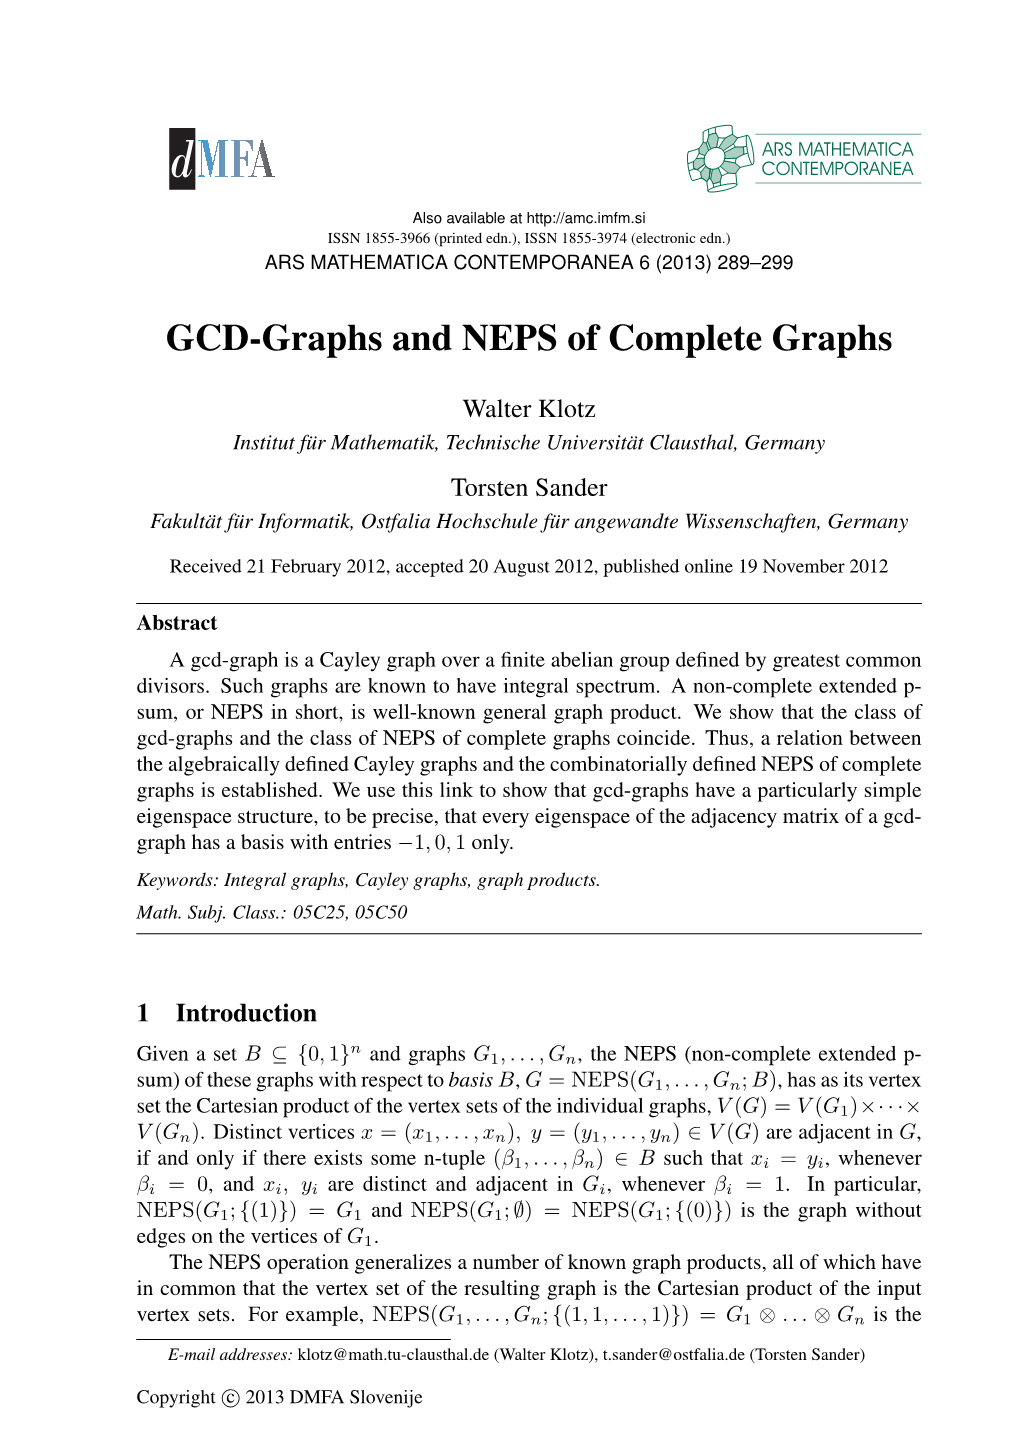 GCD-Graphs and NEPS of Complete Graphs